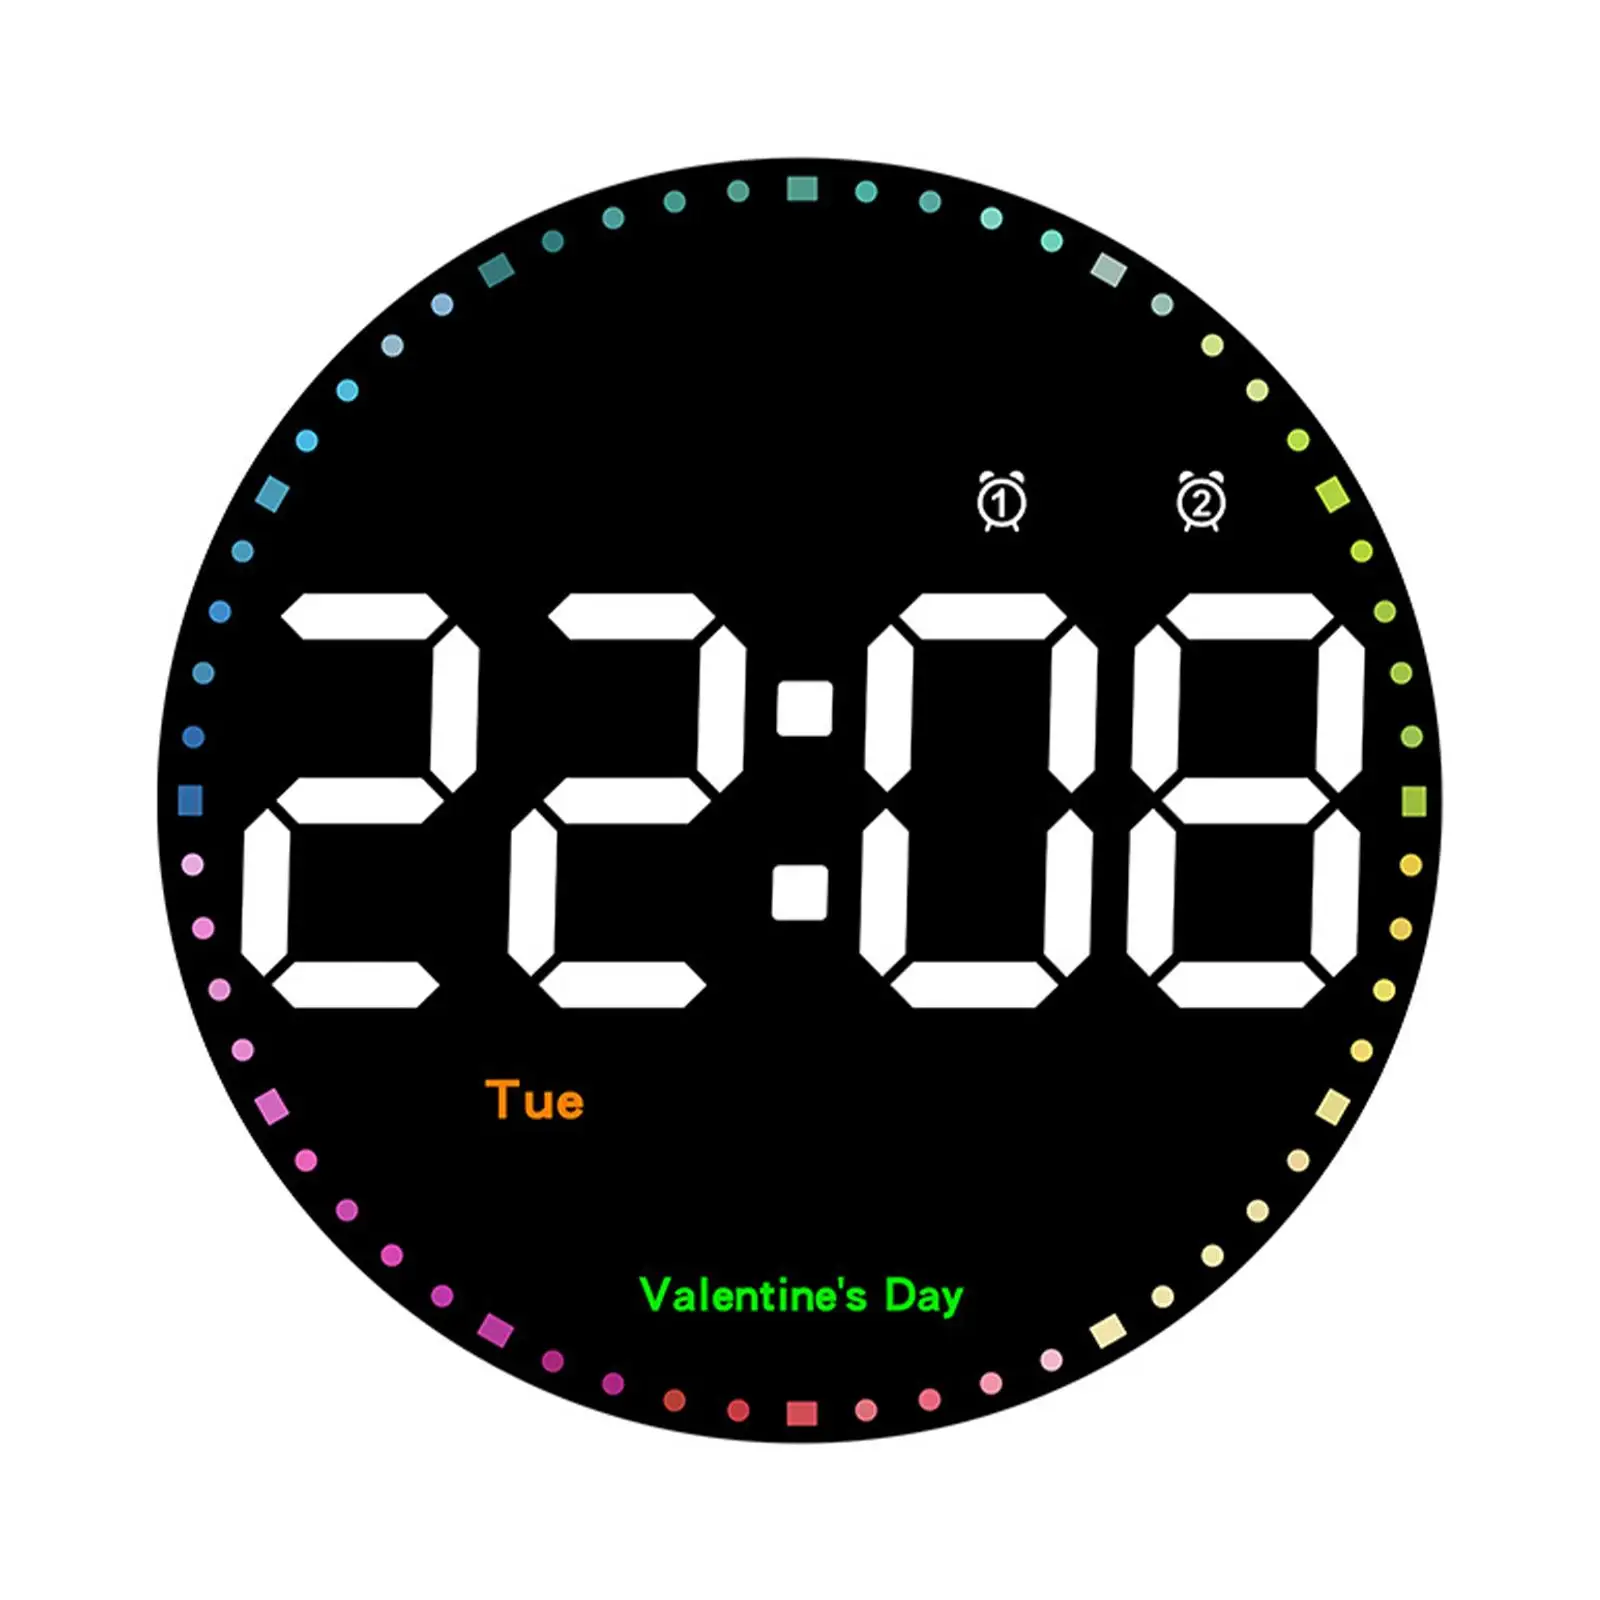 LED Wall Clock with Remote Control Round Wall Clock for Living Room Seniors